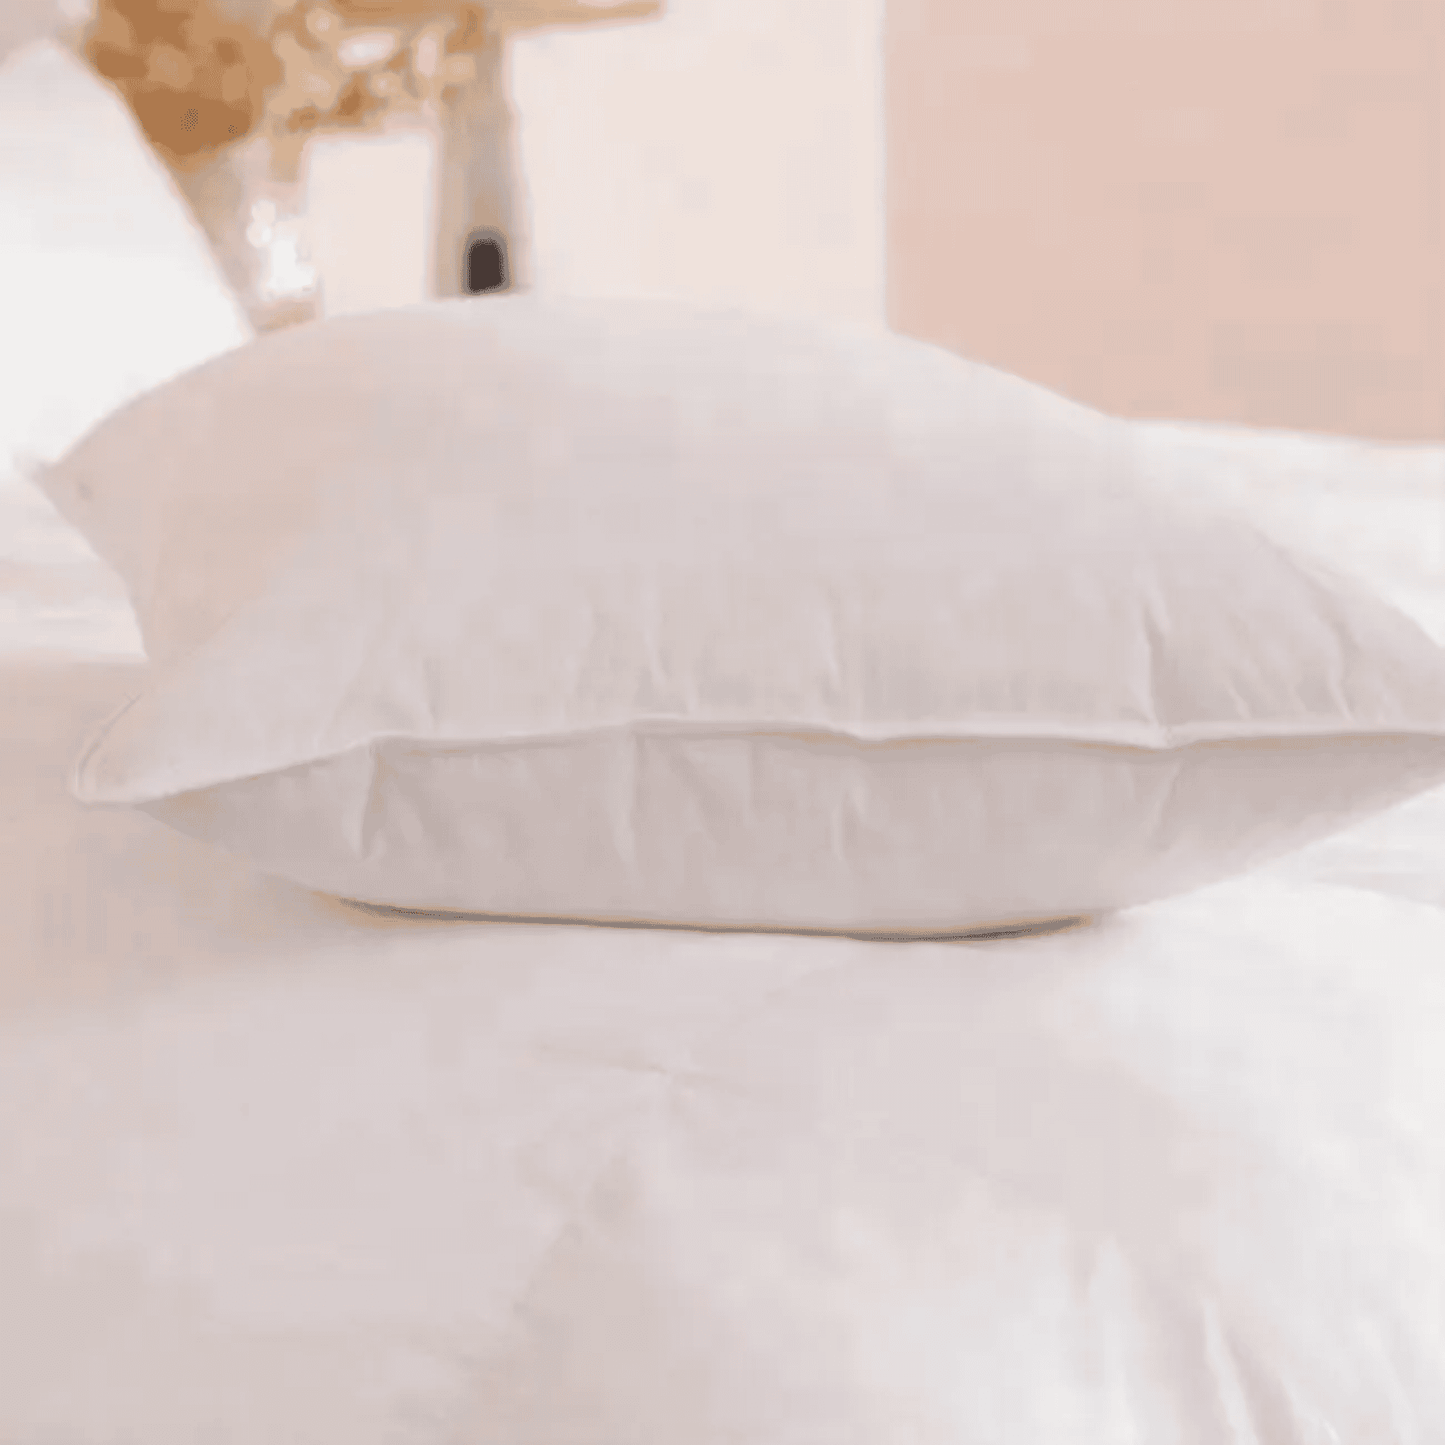 PREMIUM PILLOW CASES, SOLID WHITE PLAIN, ENVELOPE AND ZIPPER STYLE, {250 THREAD COUNT, 60% COTTON 40% POLYESTER}